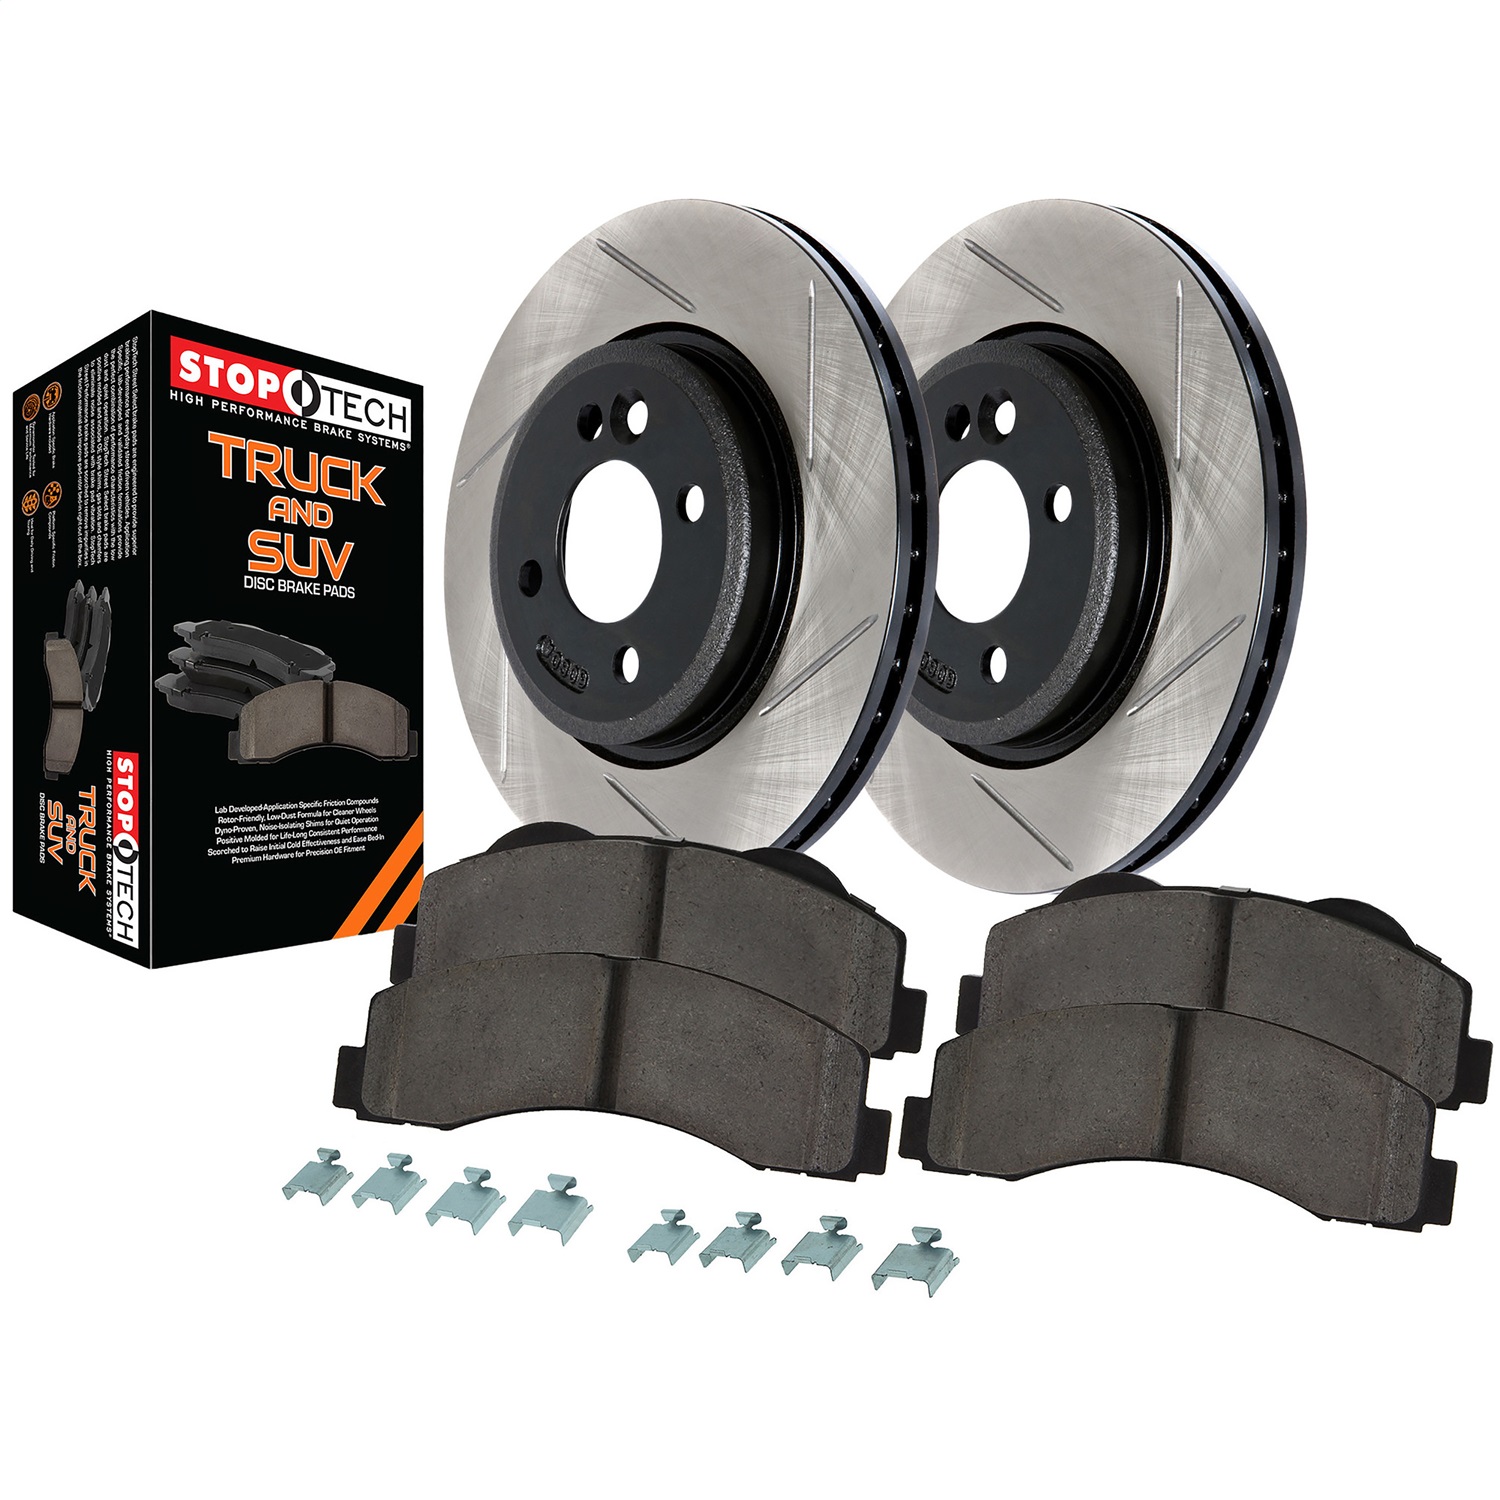 StopTech 970.65009 Truck Performance - 2 Wheel Disc Brake Kit w/Slotted Rotor